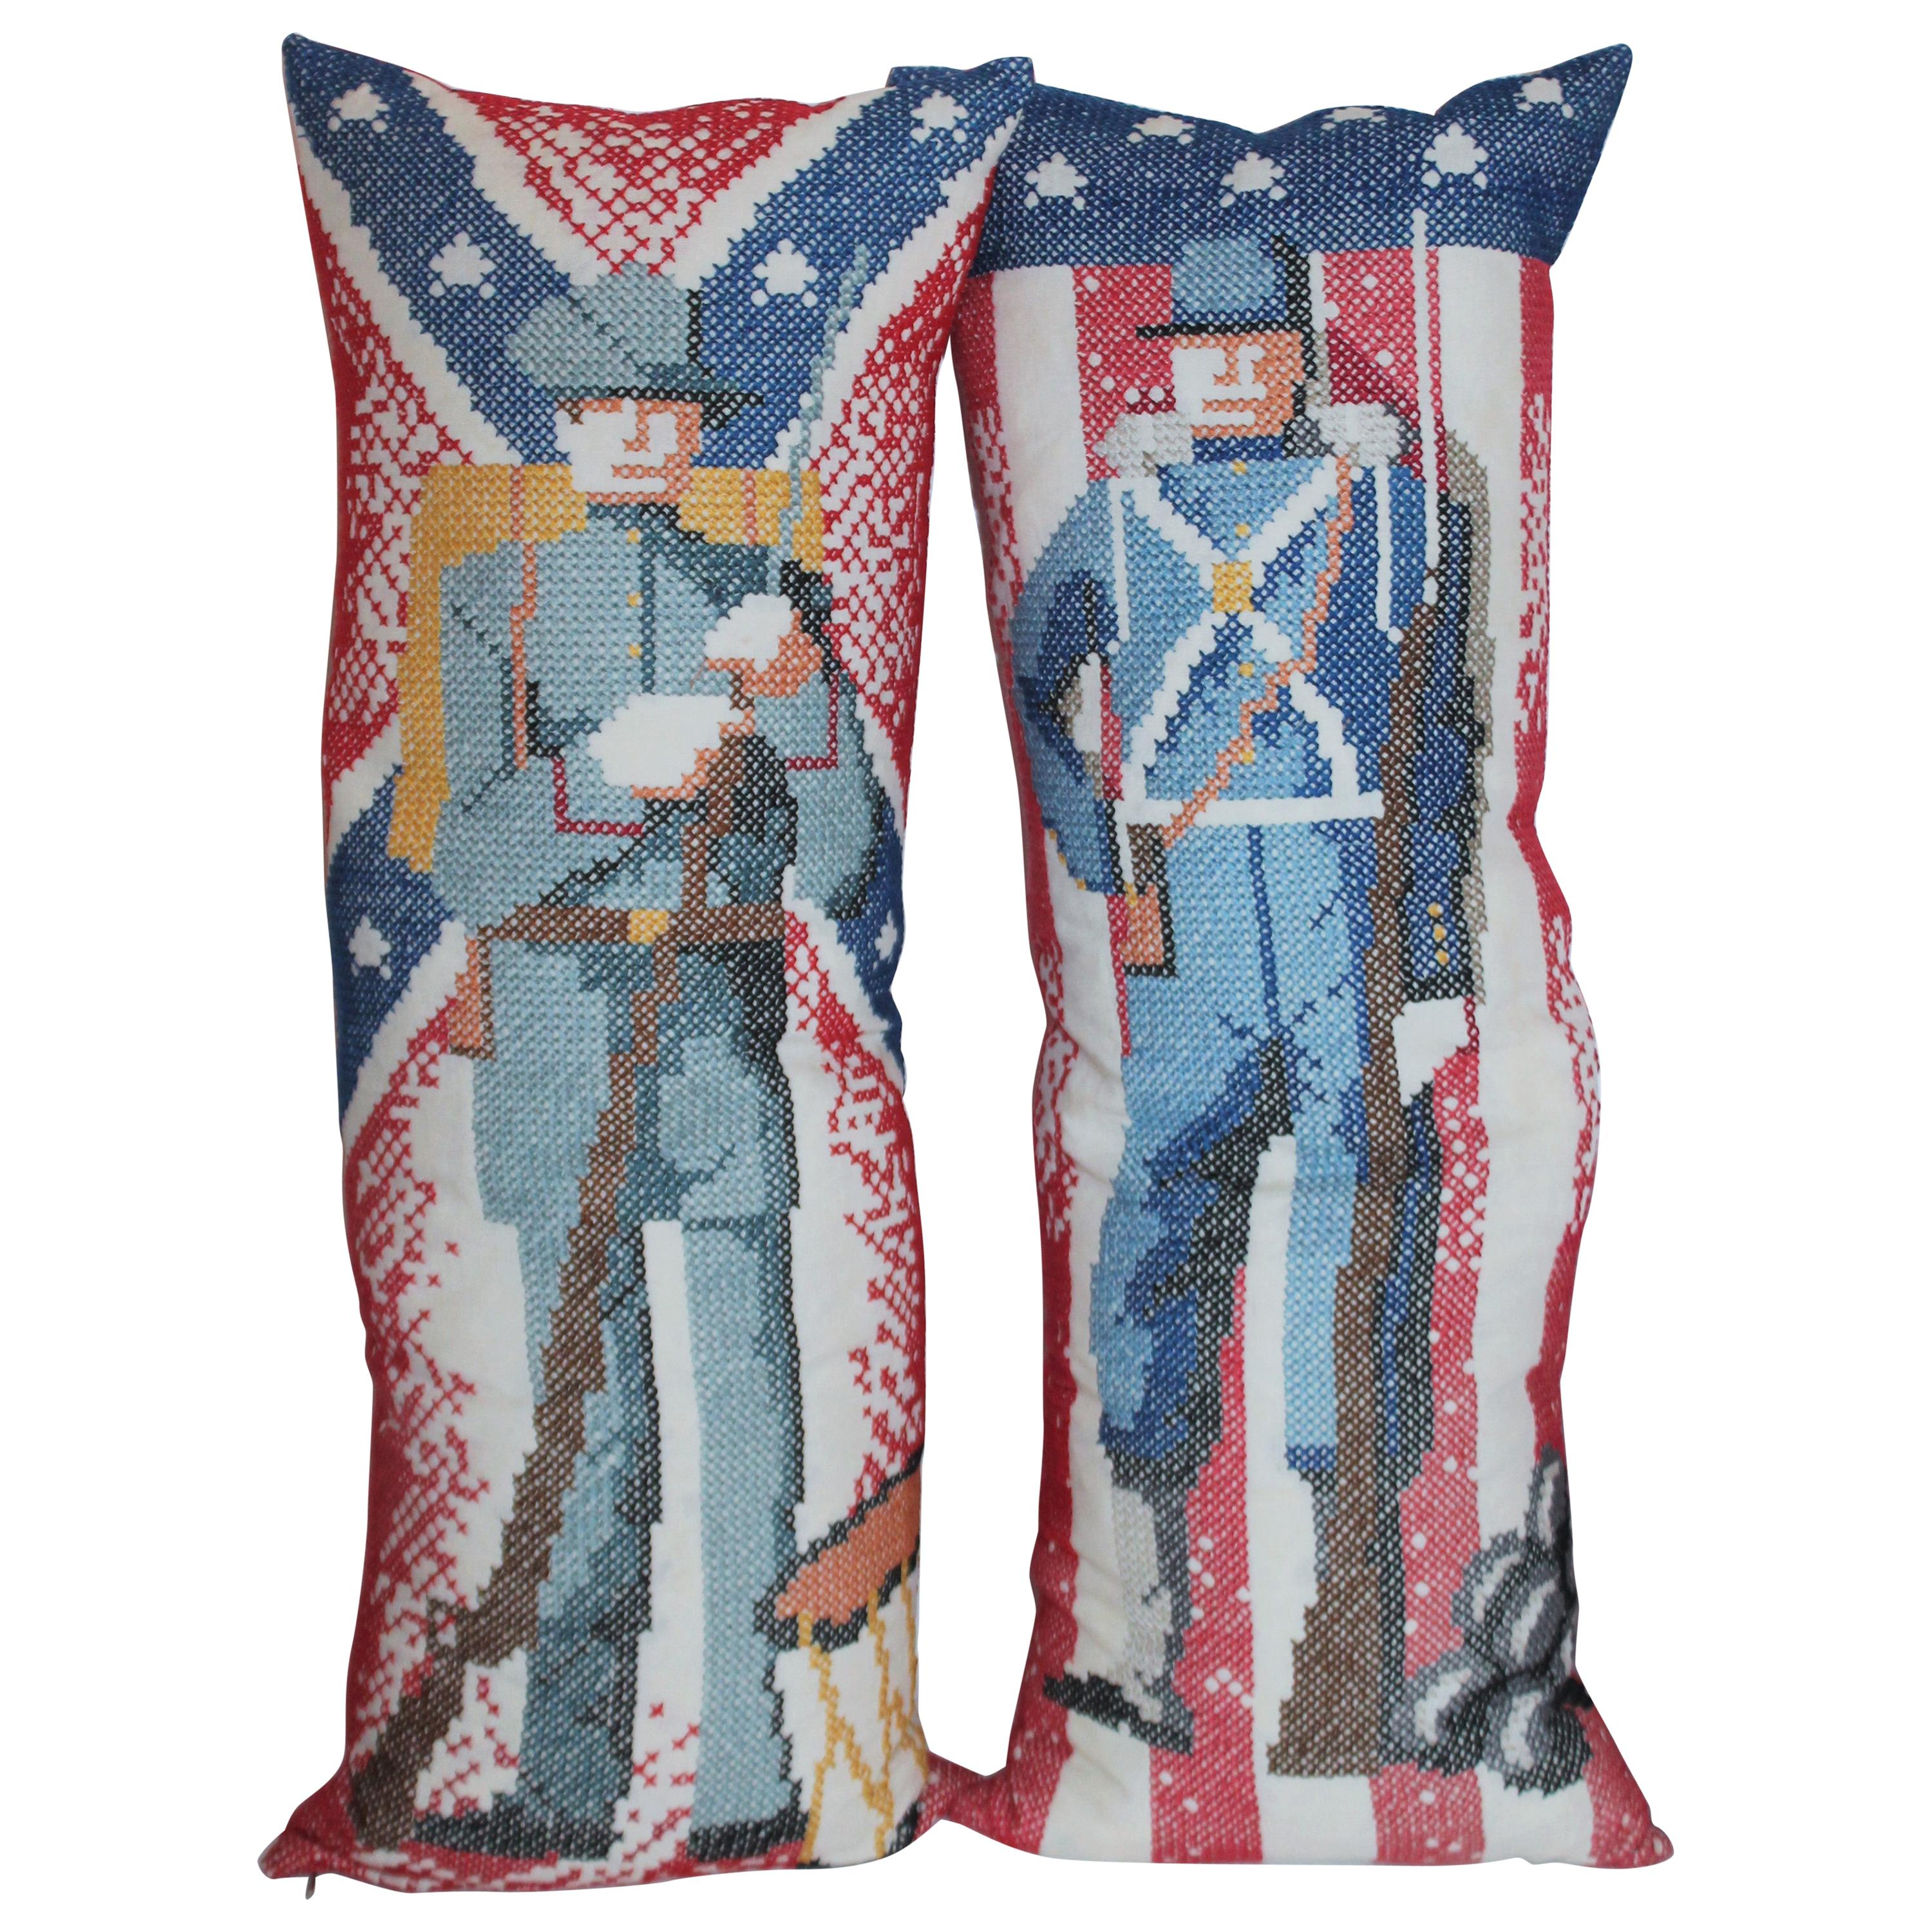 Handmade Pillows of Soldiers For Sale